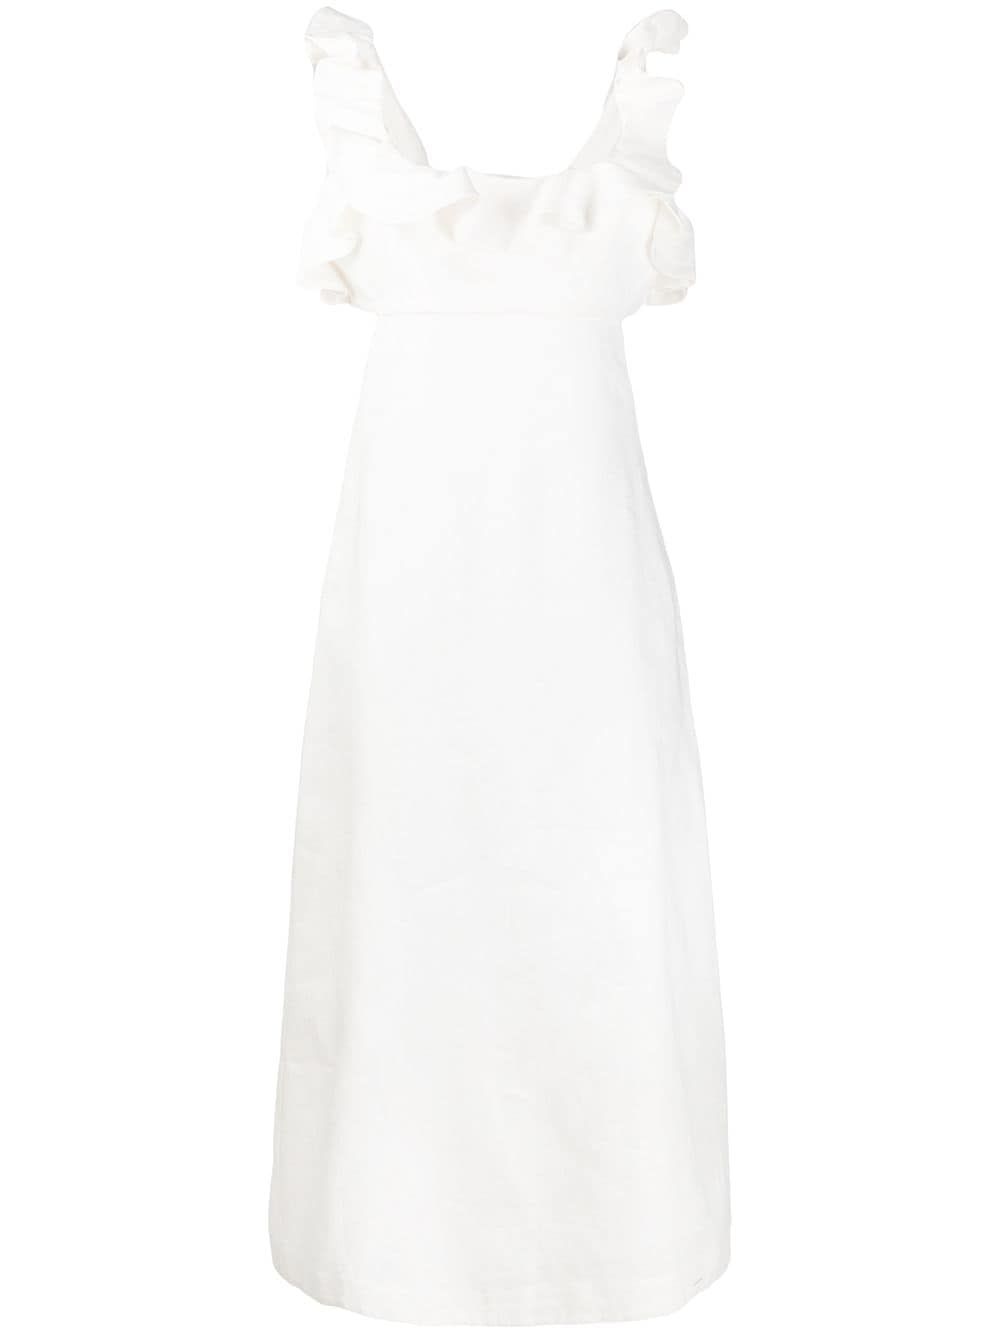 white dresses to wear to a wedding